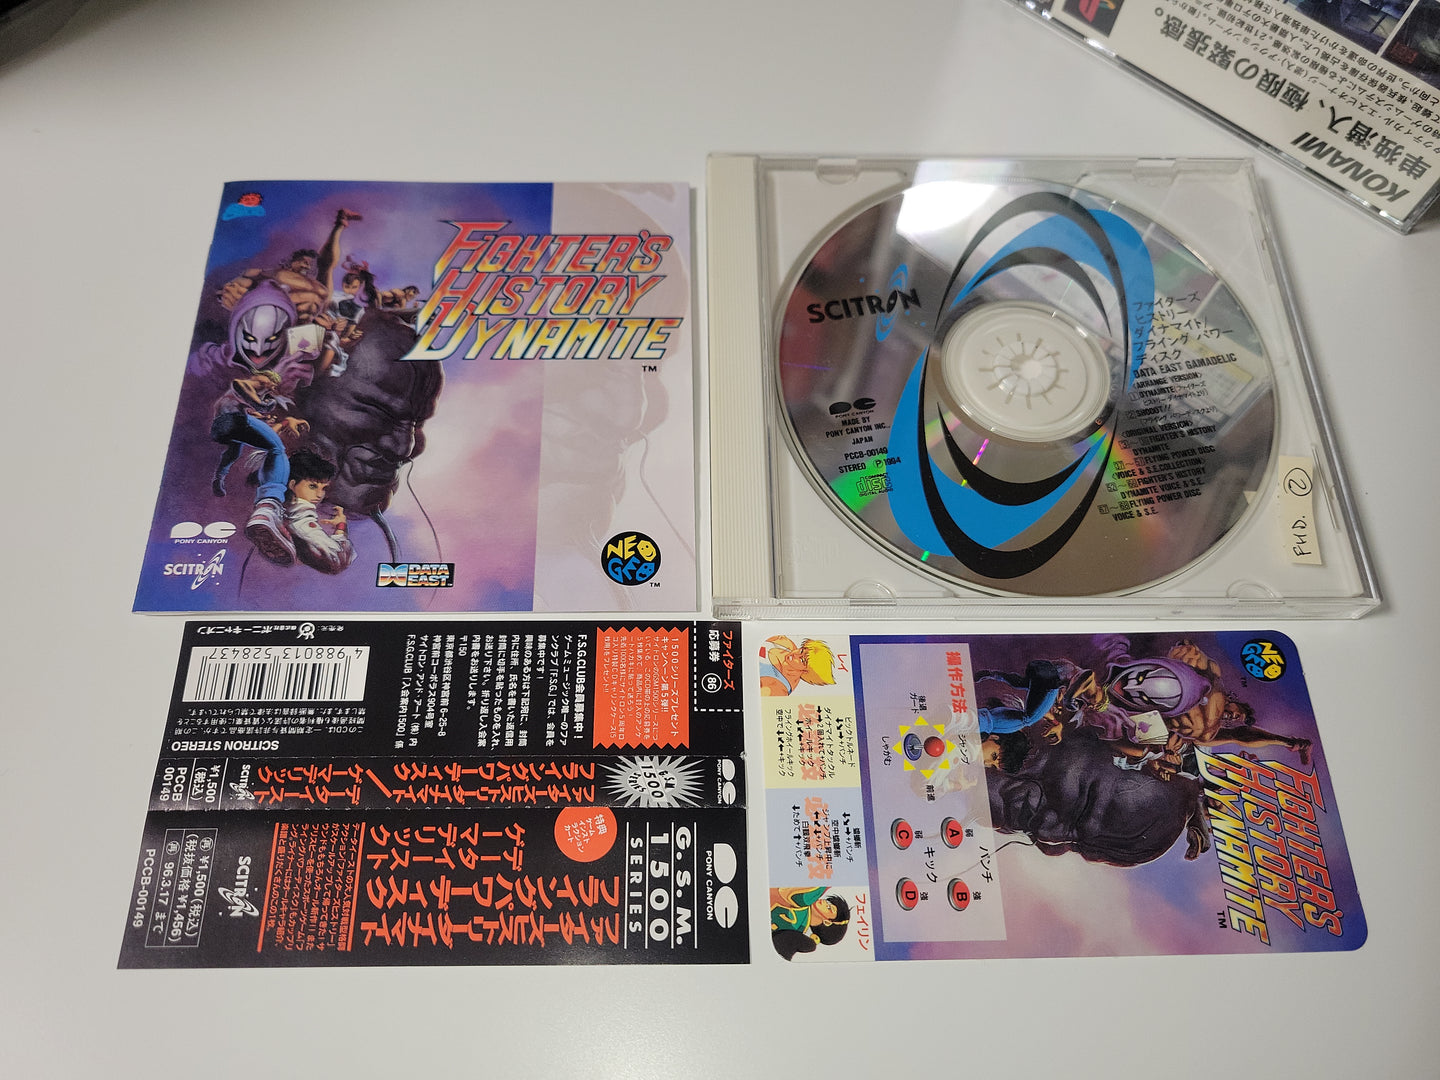 FIGHTER'S HISTORY DYNAMITE / FLYING POWER DISC - Music cd soundtrack